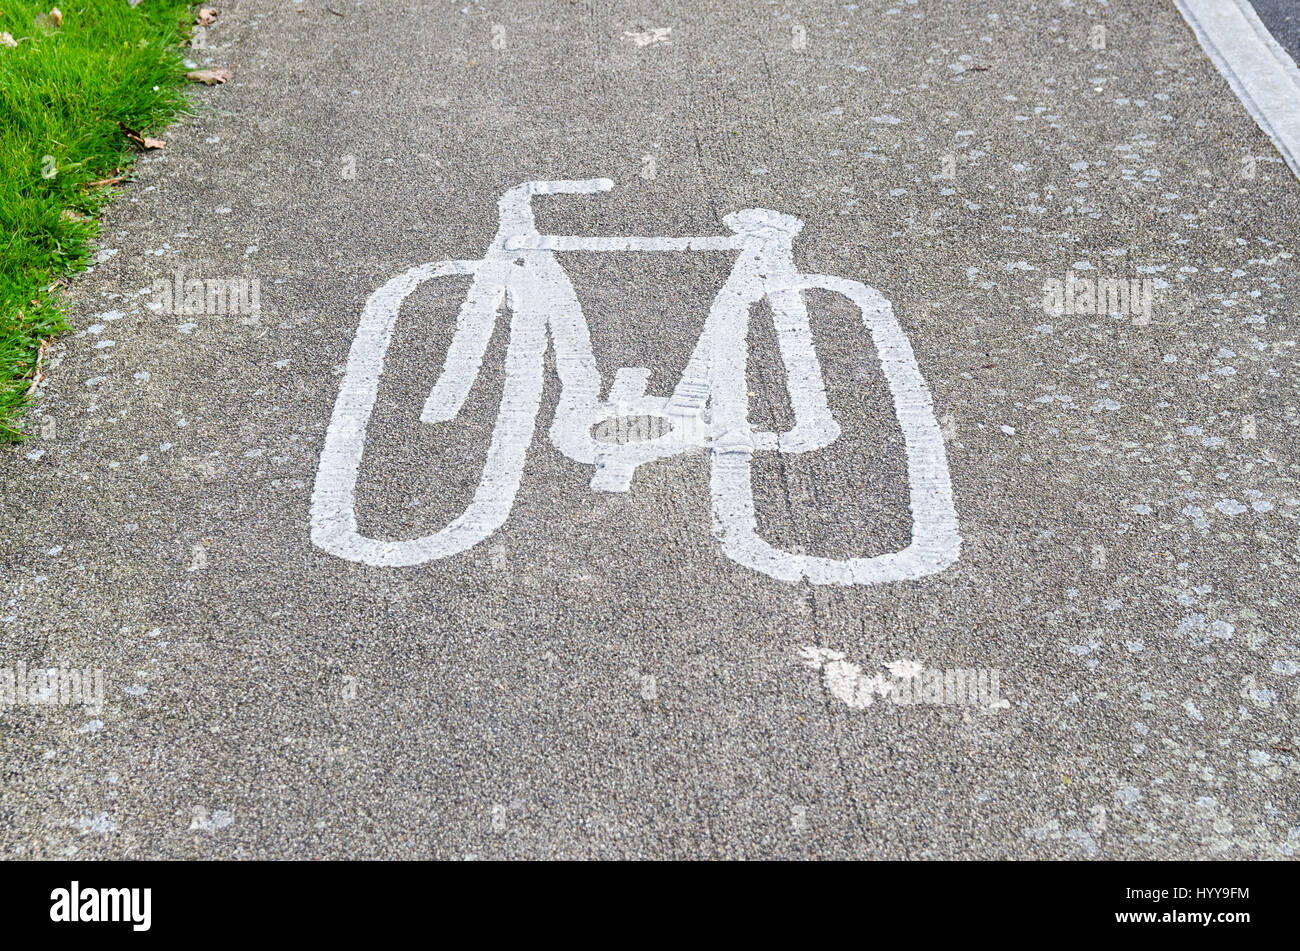 Cycle path with picture of bicycle painted on tarmac Stock Photo